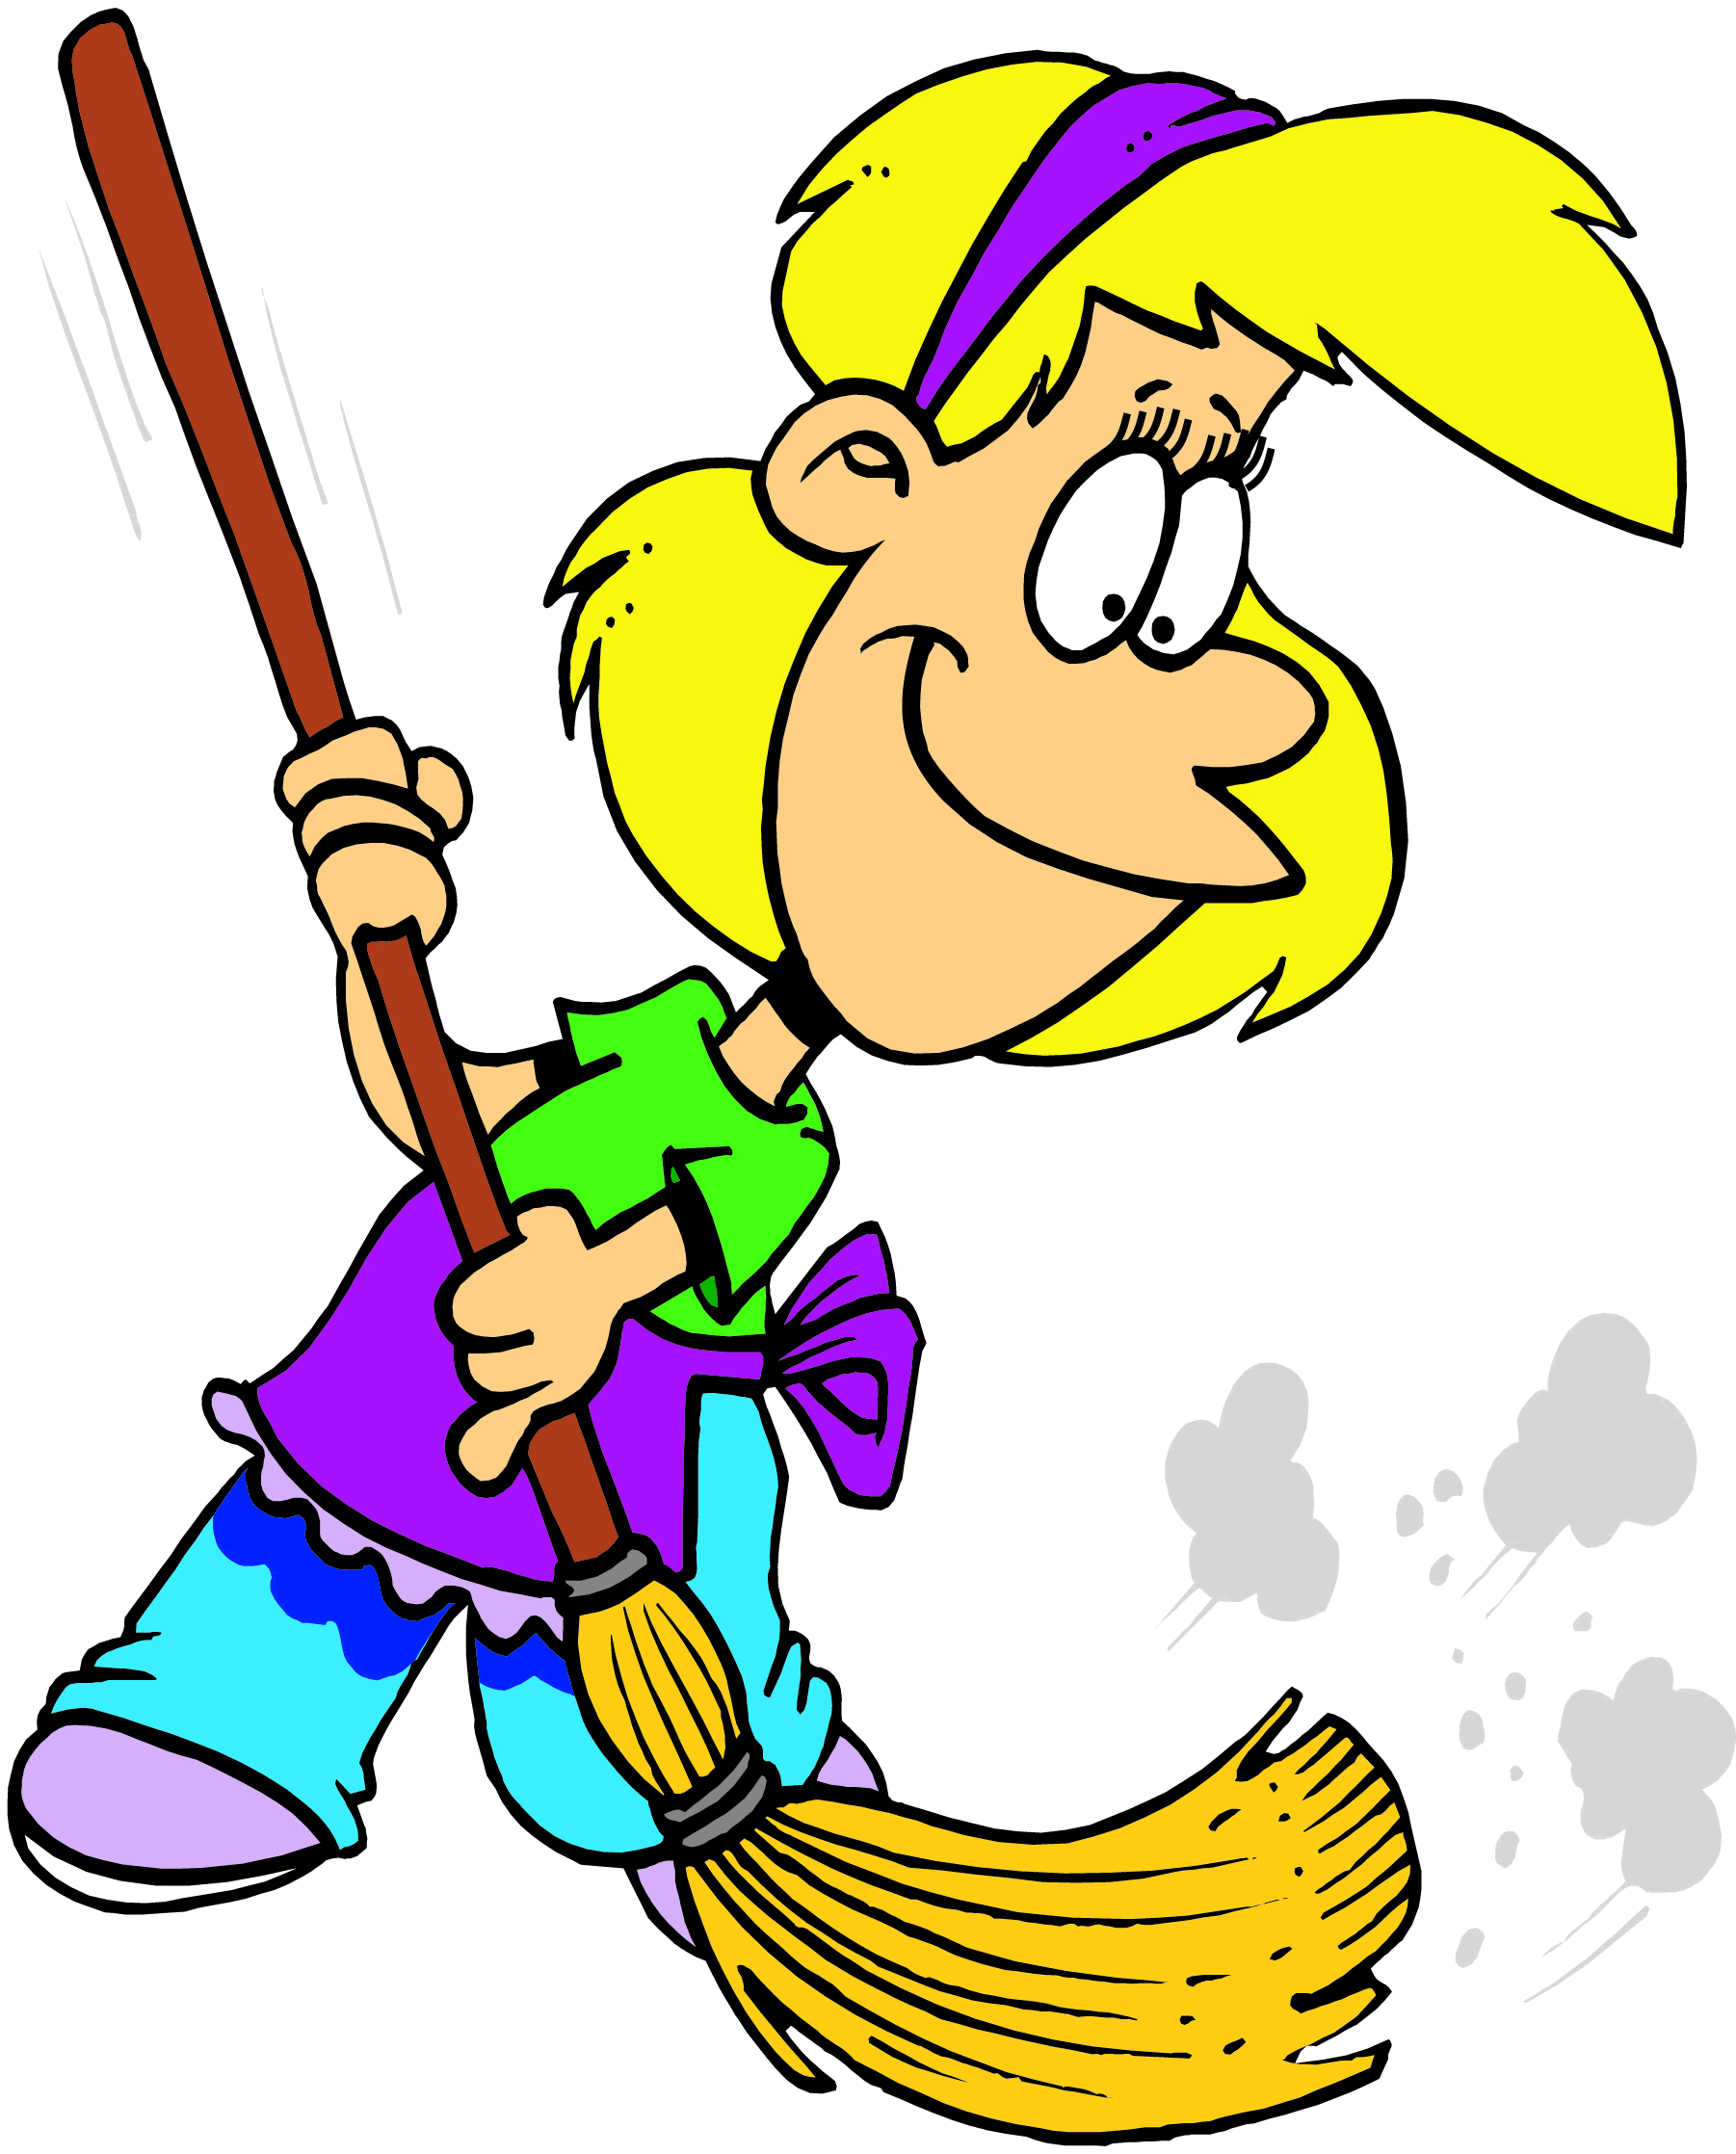 Cleaning clean up clipart kid